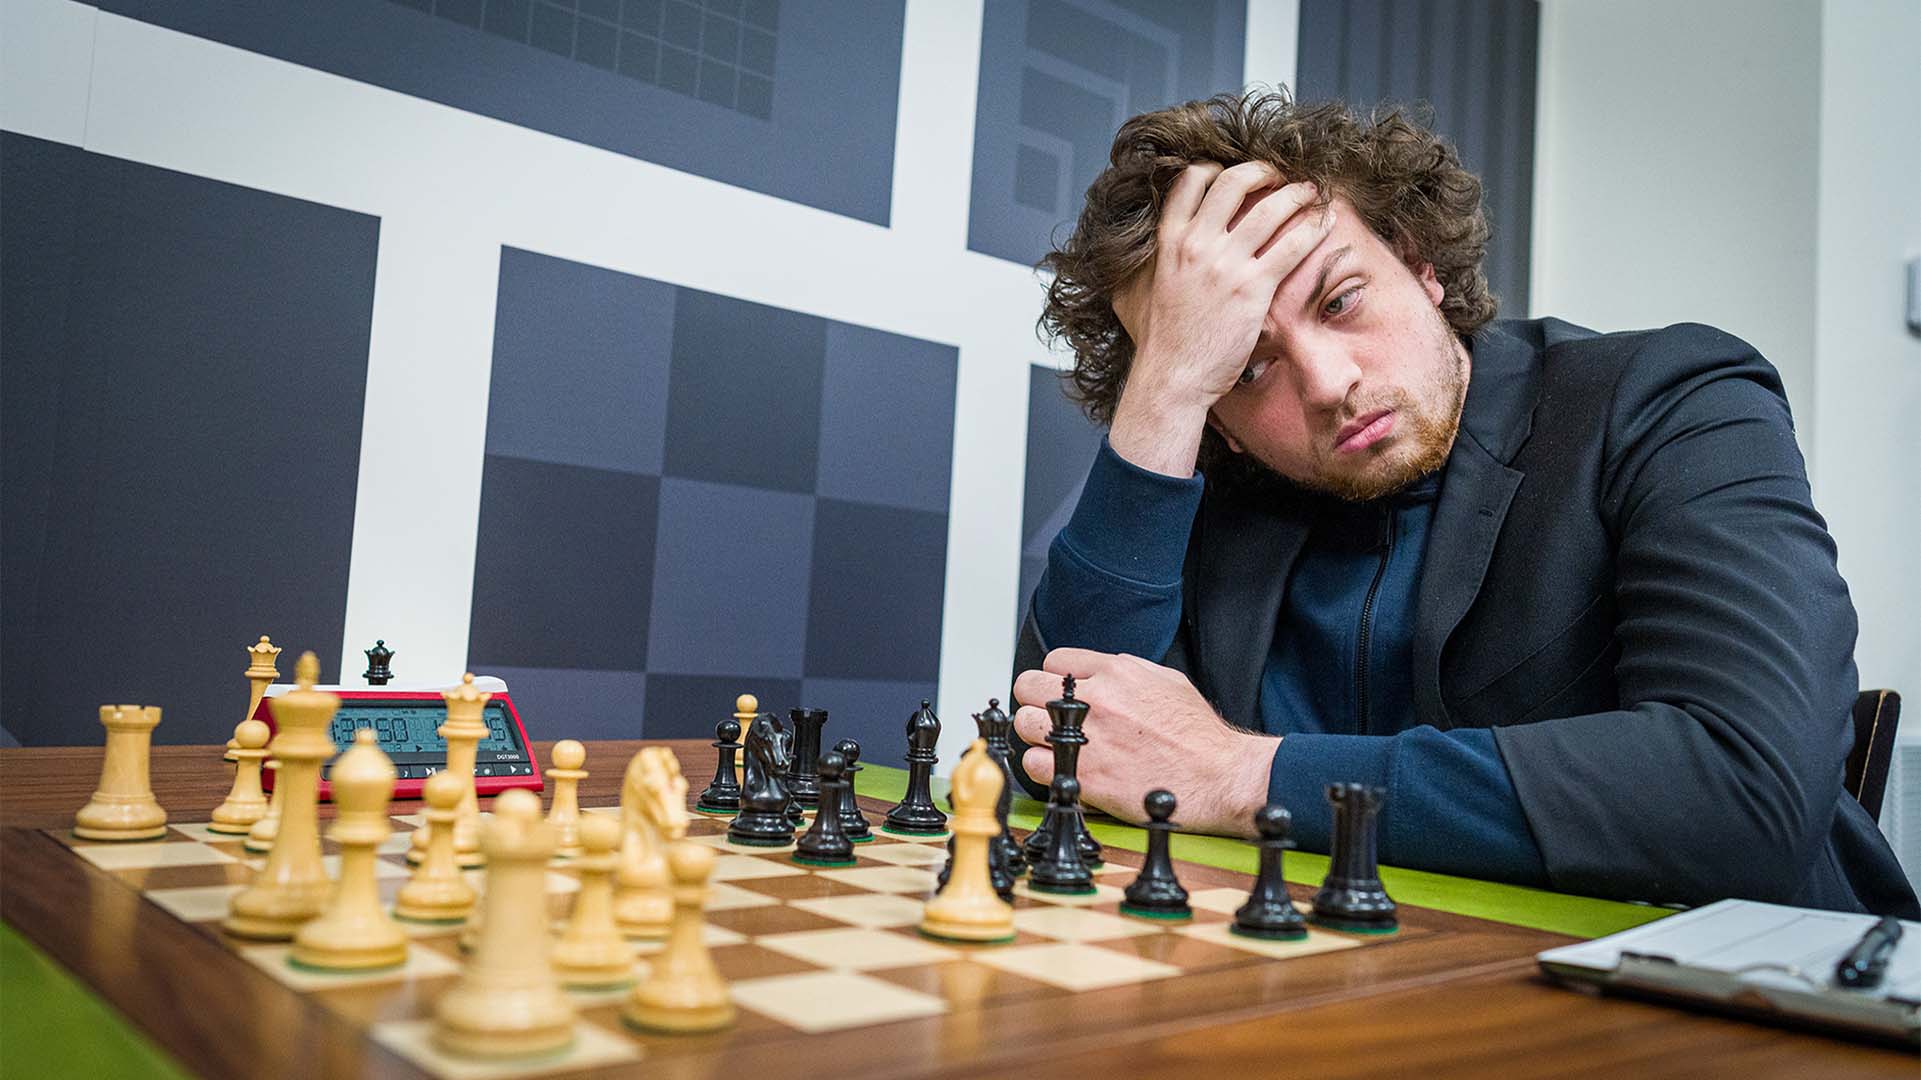 Chess player accused of cheating gets body scanned before entering